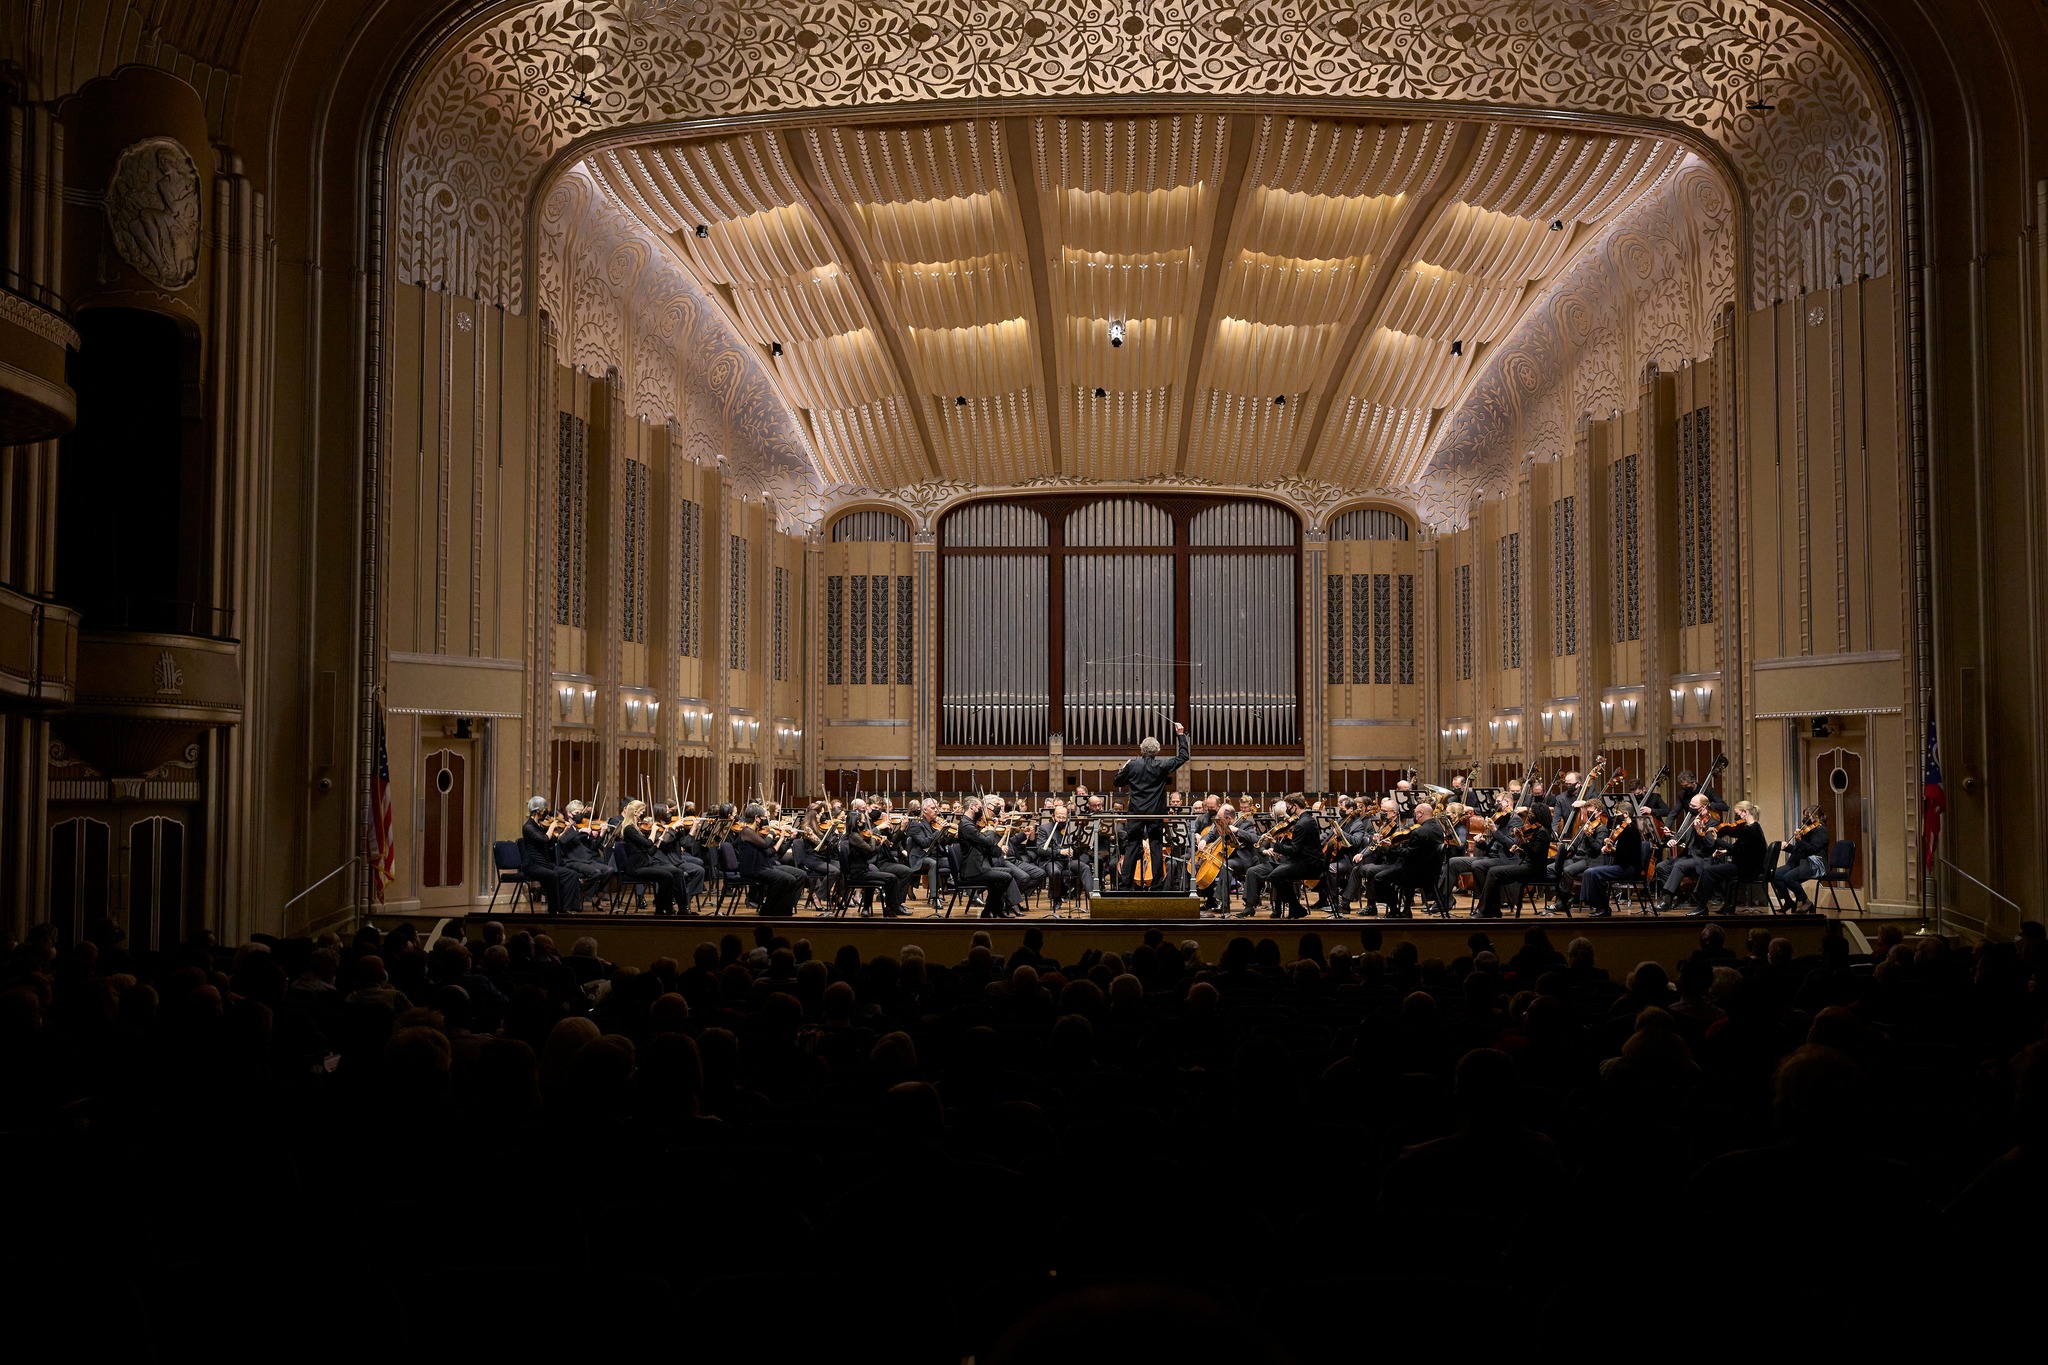 Photo by The Cleveland Orchestra